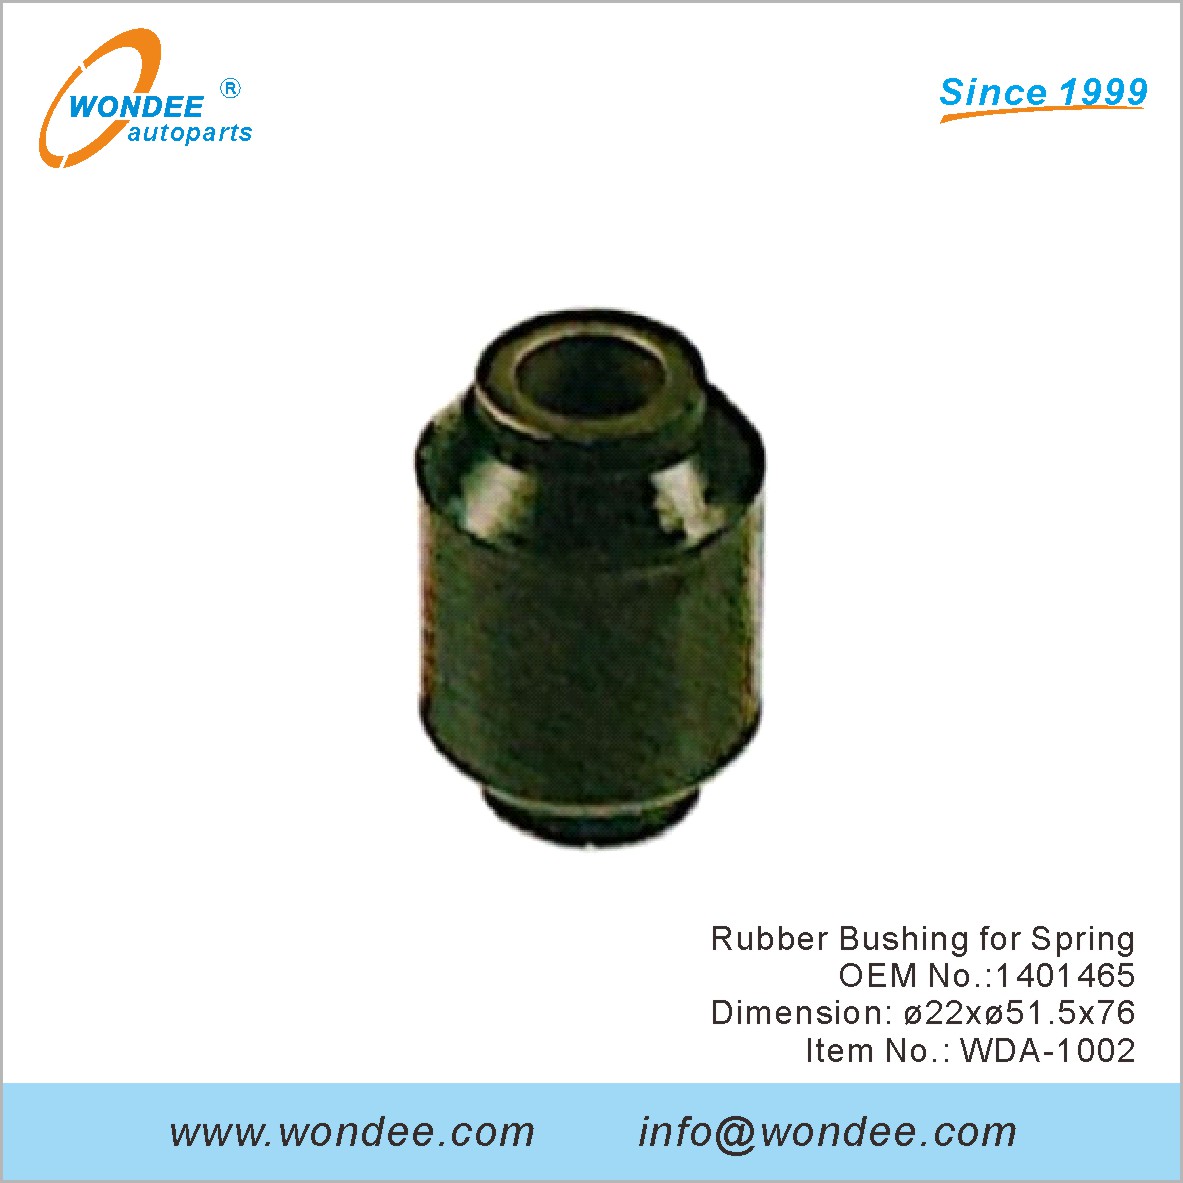 Rubber Bushing for Spring OEM 1401465 for DAF from WONDEE